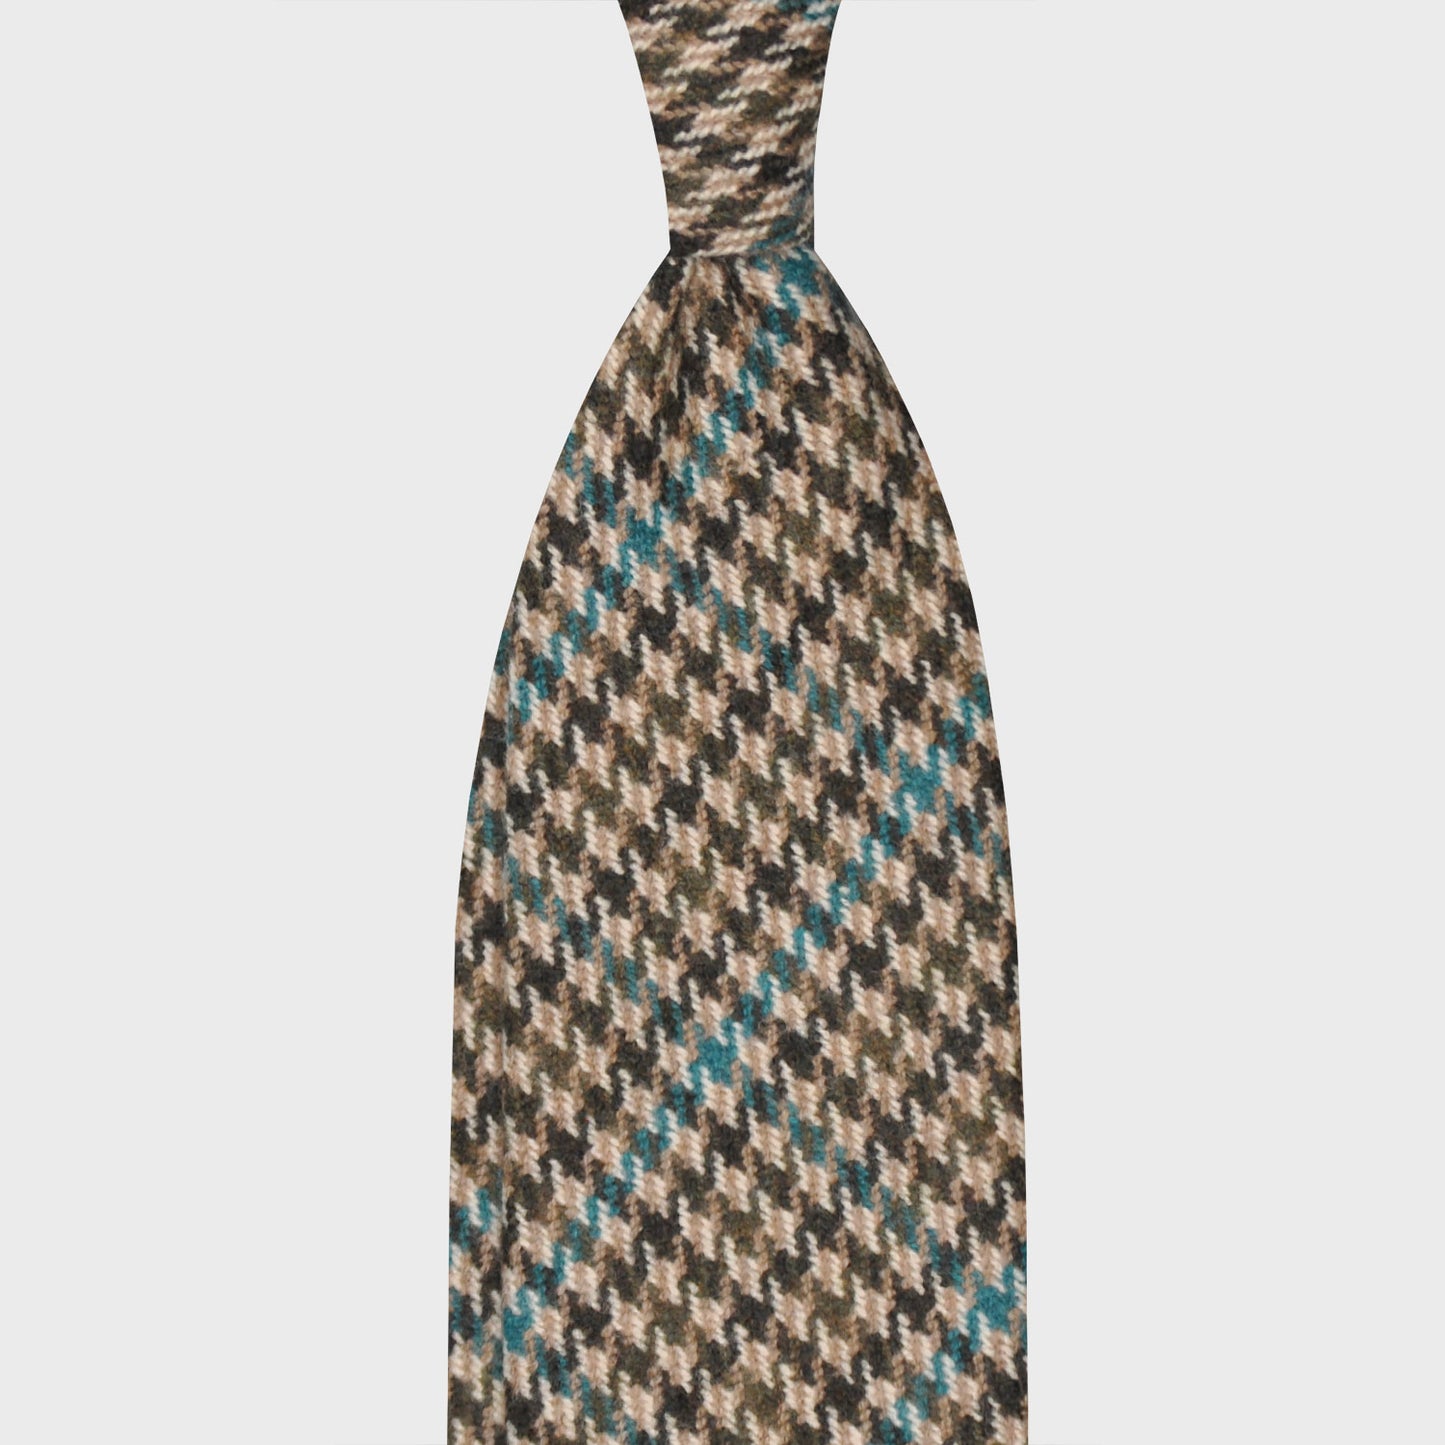 Green Wool Tweed Tie Handmade Unlined Pie de Poule Pattern. Pie de poule tweed wool tie, F Marino ties for Wools Boutique Uomo, light tweed soft texture to the touch, 3 folds, loden green color background, emerald green windowpane